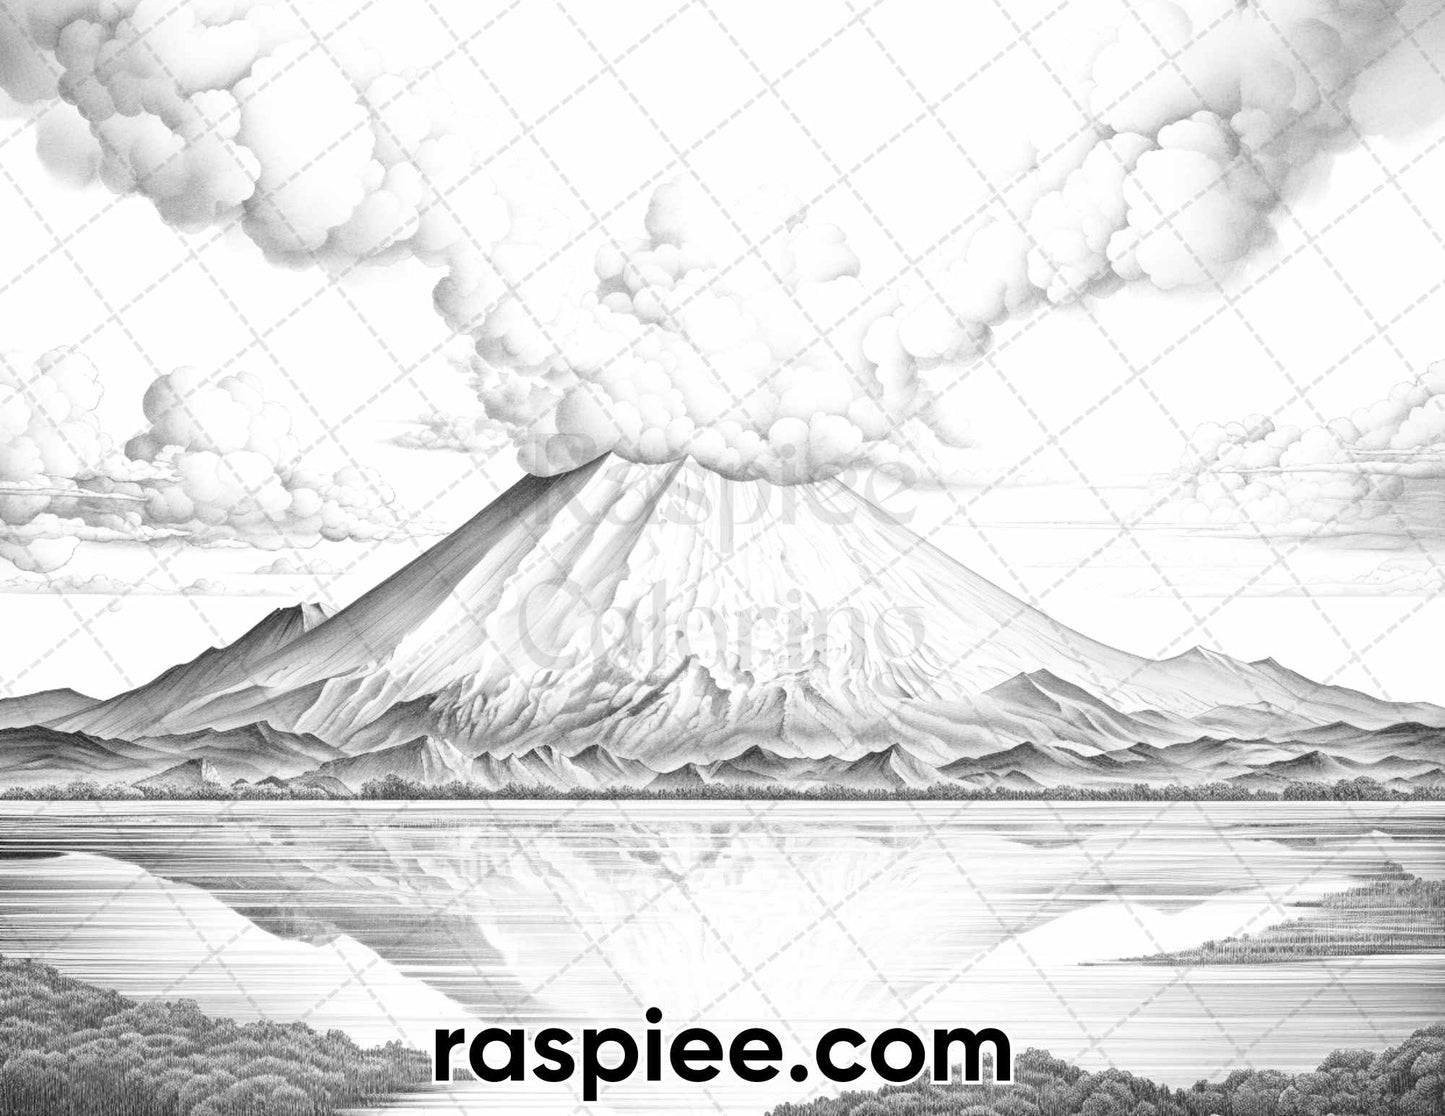 adult coloring pages, adult coloring sheets, adult coloring book pdf, adult coloring book printable, grayscale coloring pages, grayscale coloring books, landscape coloring pages for adults, lanscape coloring book, volcanic landscapes coloring pages